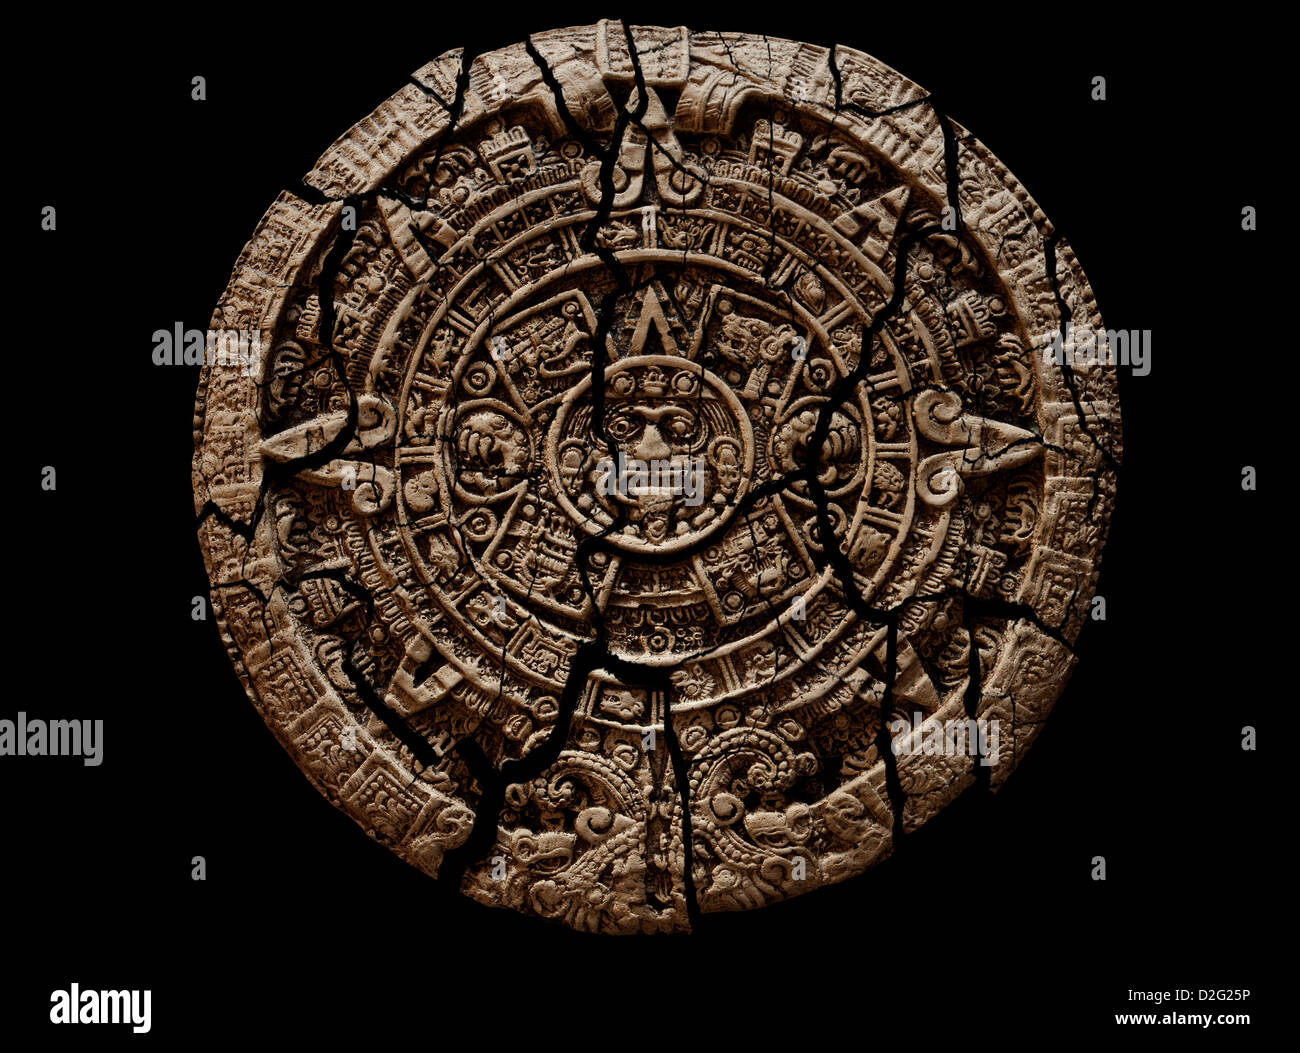 Cracked and crumbling Mayan calendar stone tablet on black background. Cutout Stock Photo